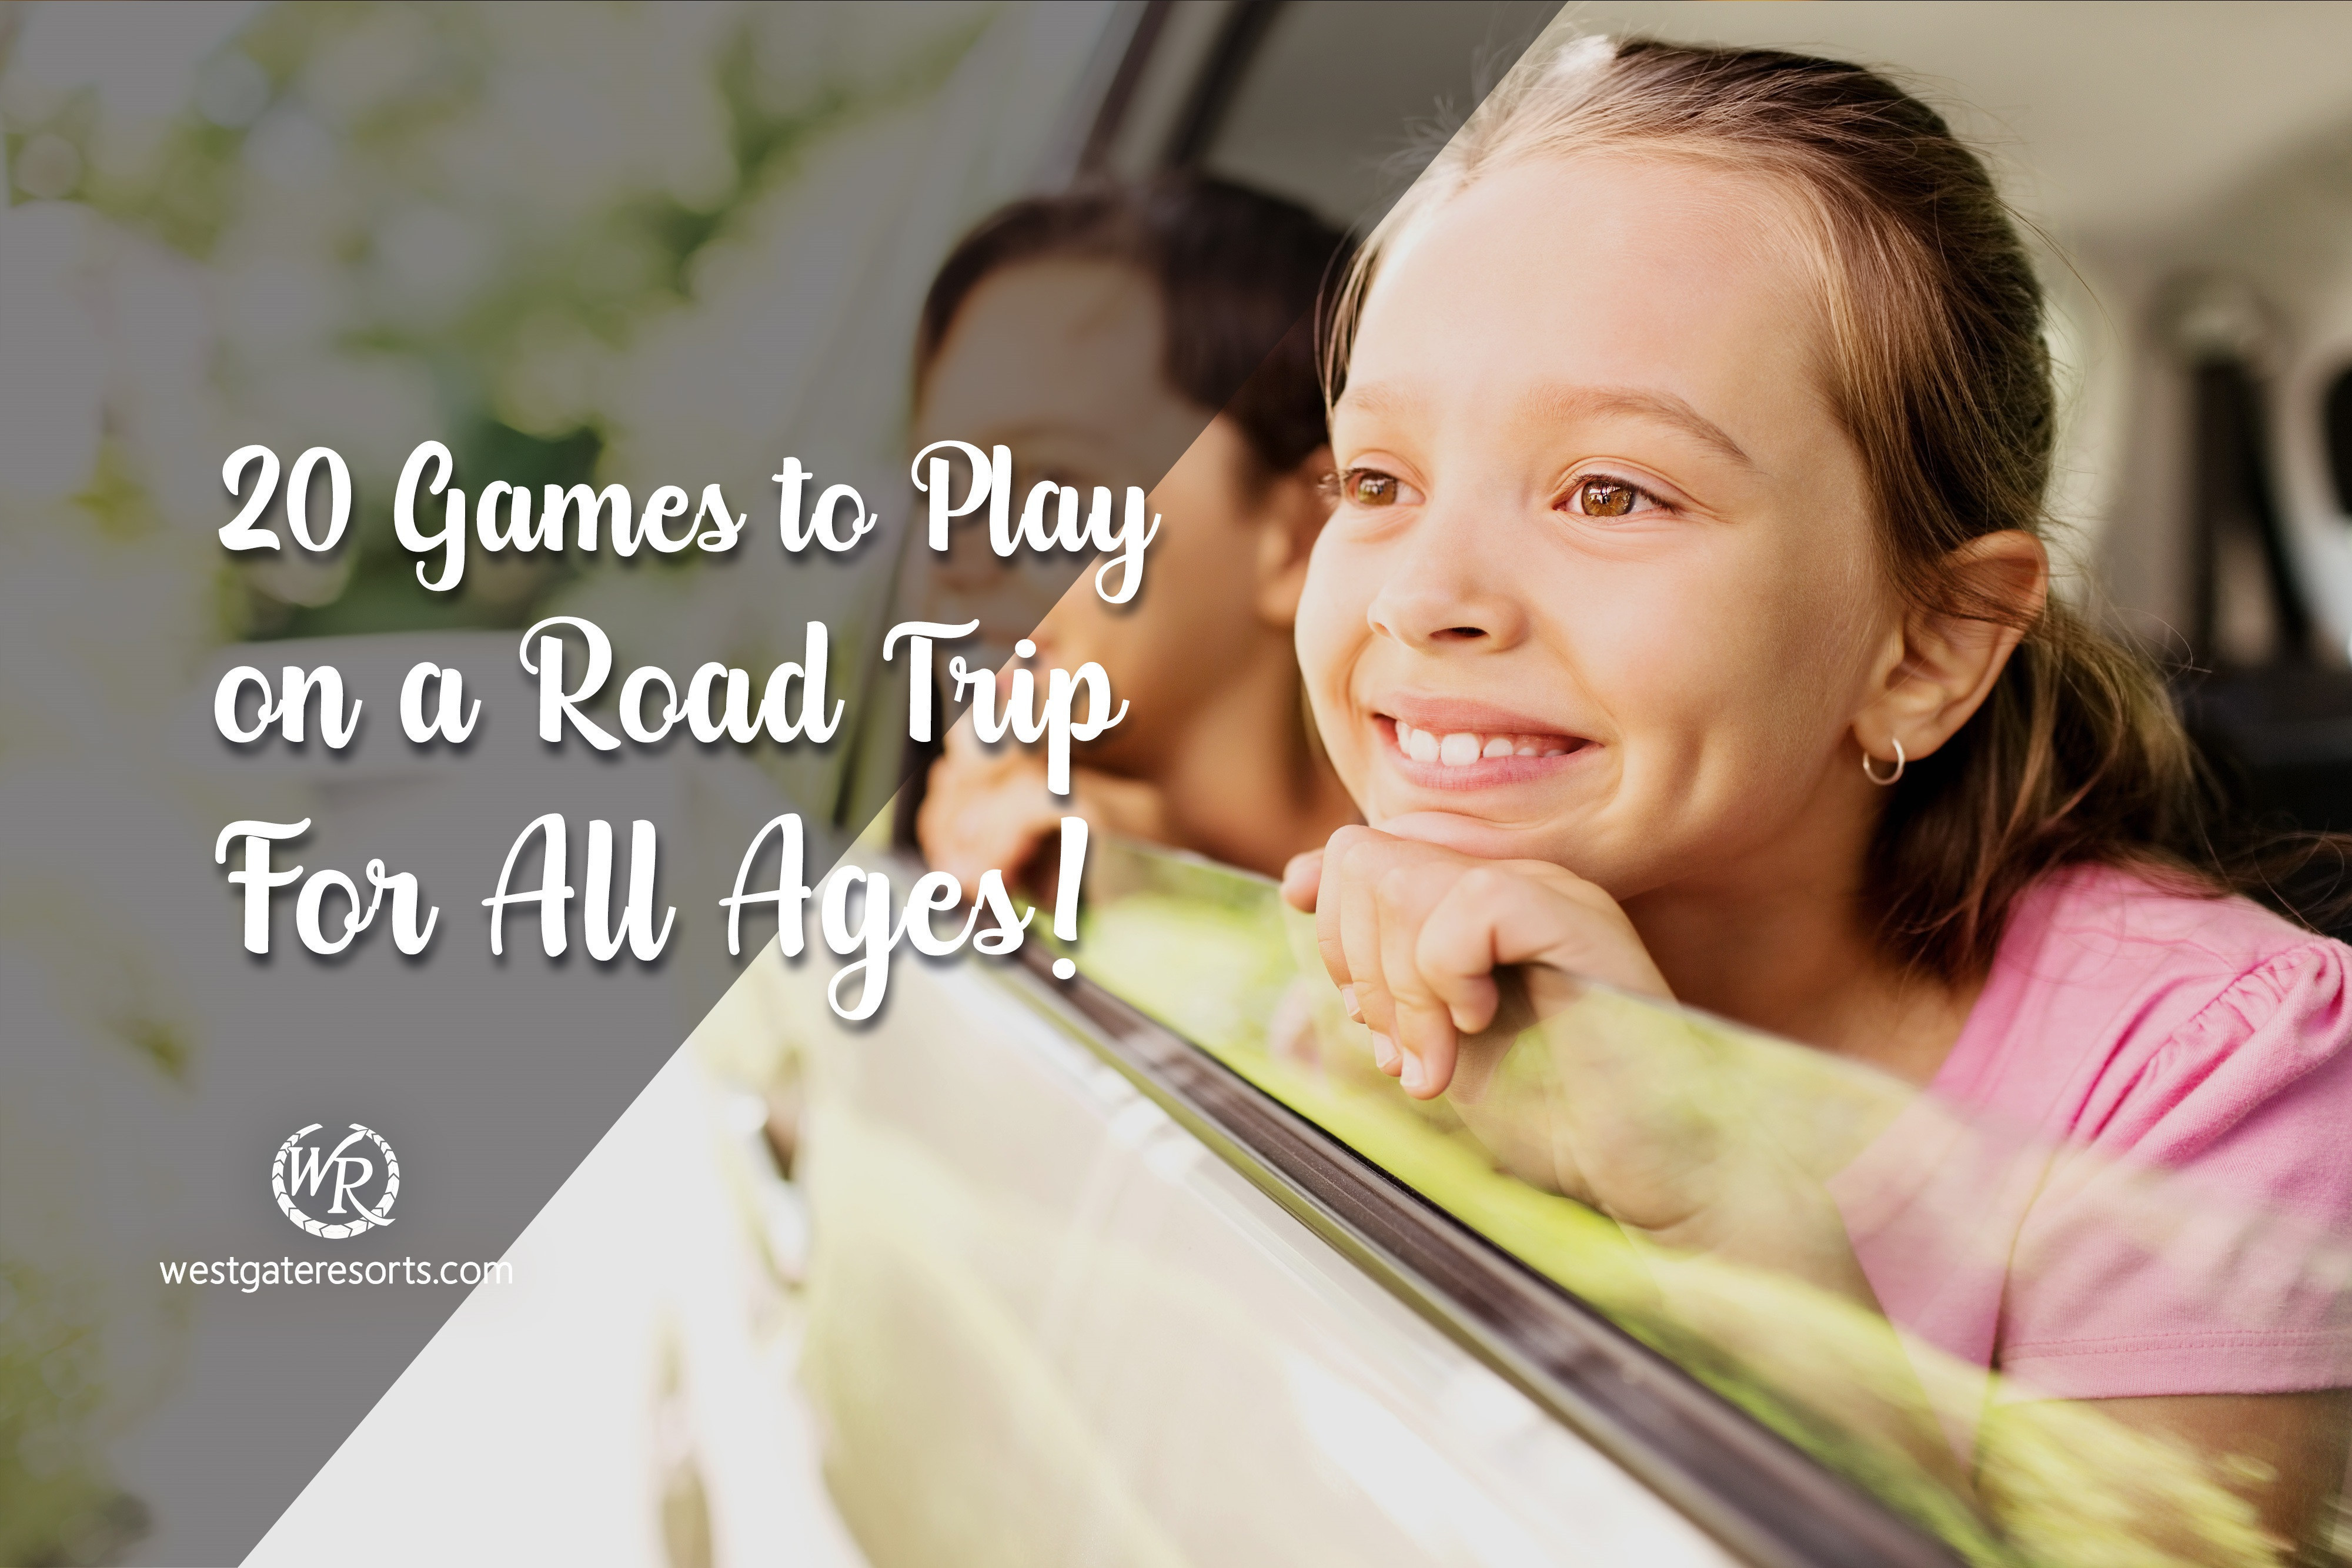 20 Games to Play on a Road Trip For All Ages!